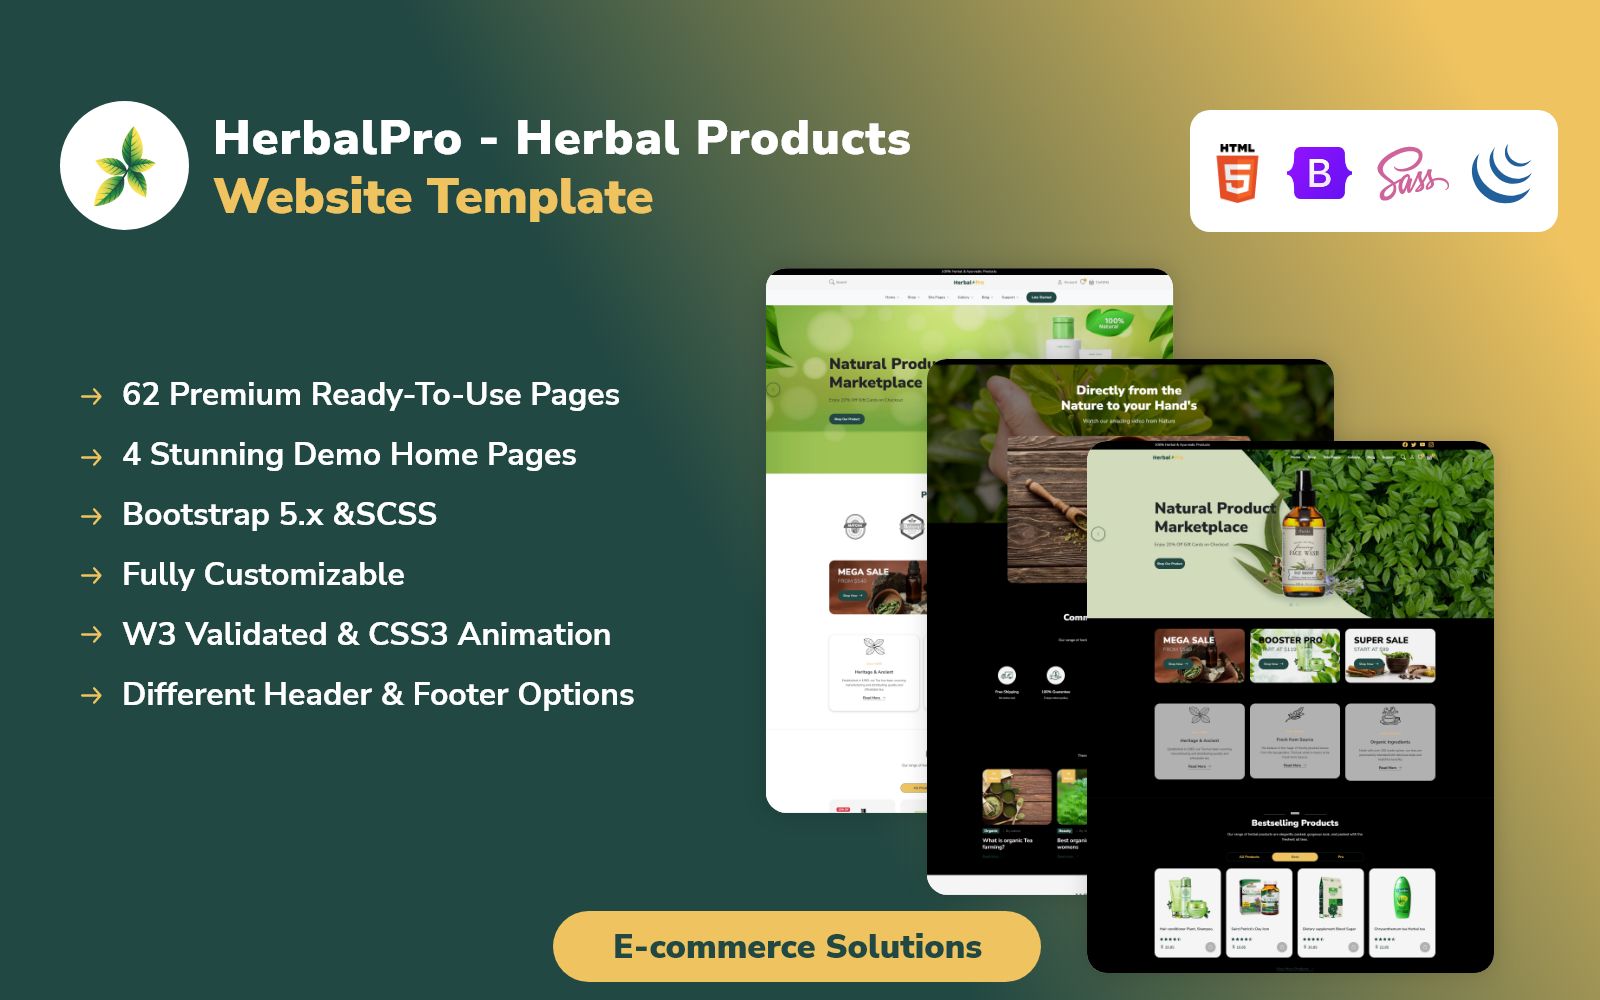 HerbalPro - Herbal Products Website Template